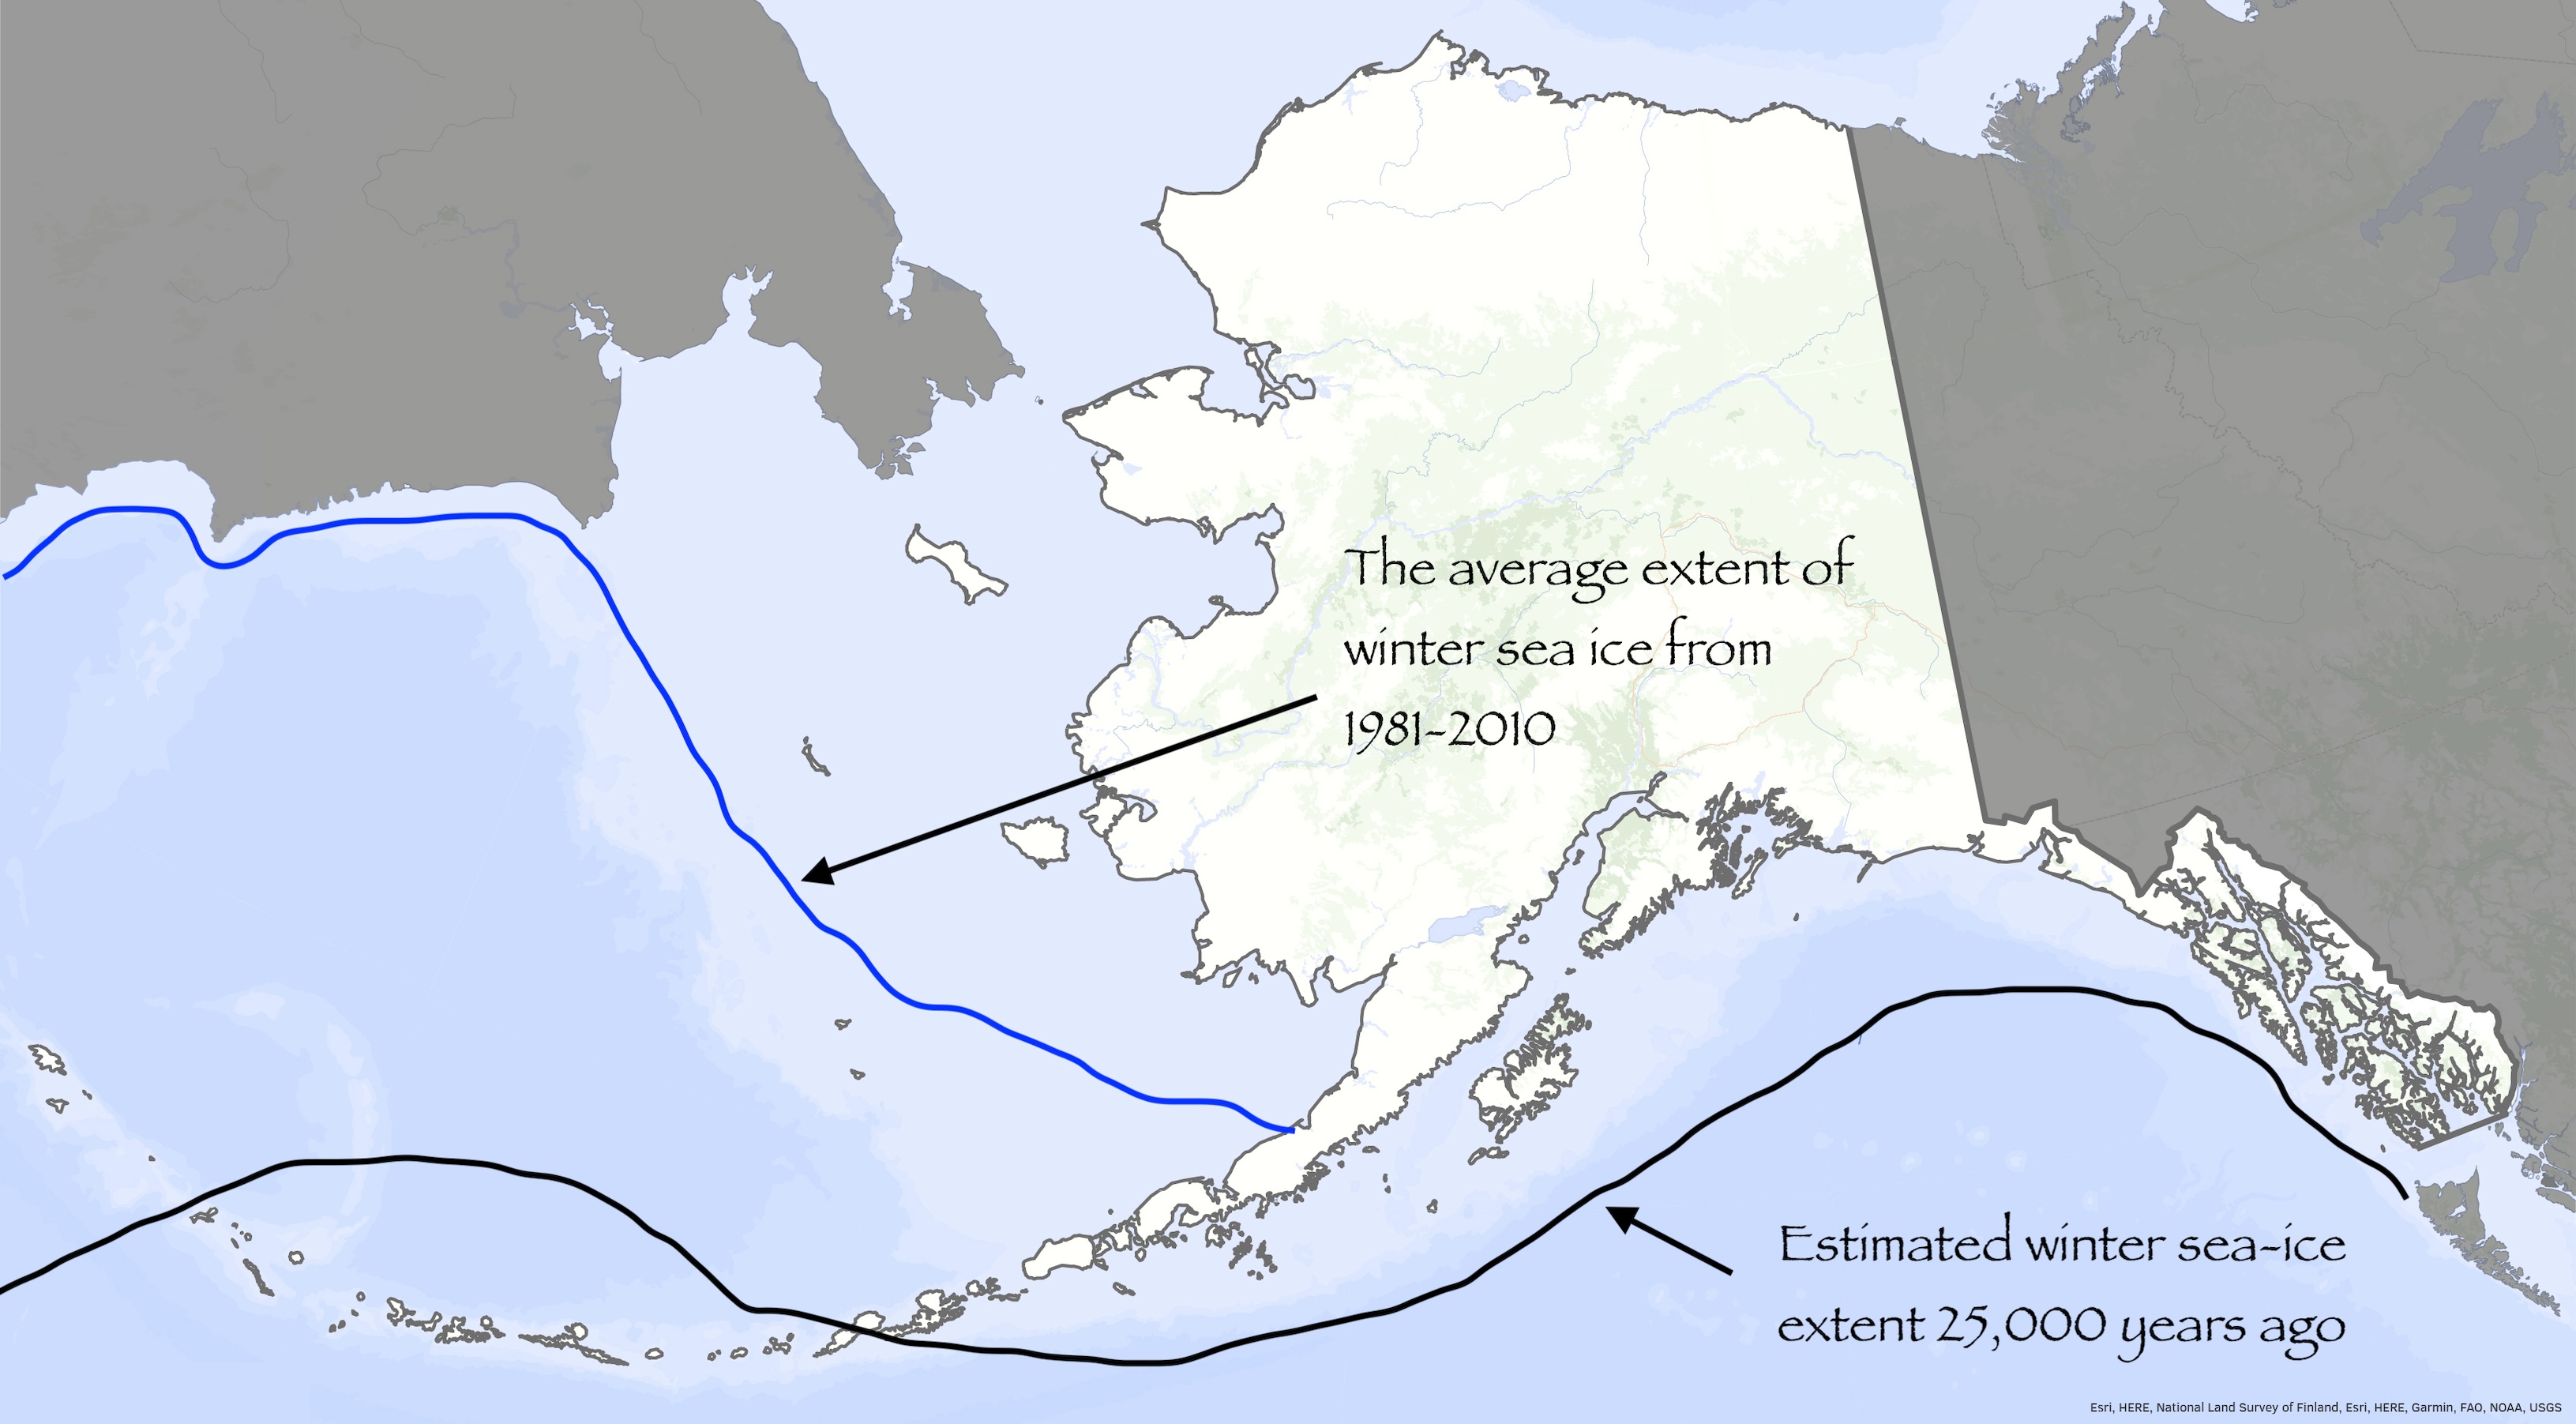 A map of Alaska and surrounding oceans features a line in the Bering Sea showing the average southernmost extent of winter sea ice from 1981-2020 and another line in the Gulf of Alaska showing the estimated extent 25,000 years ago.